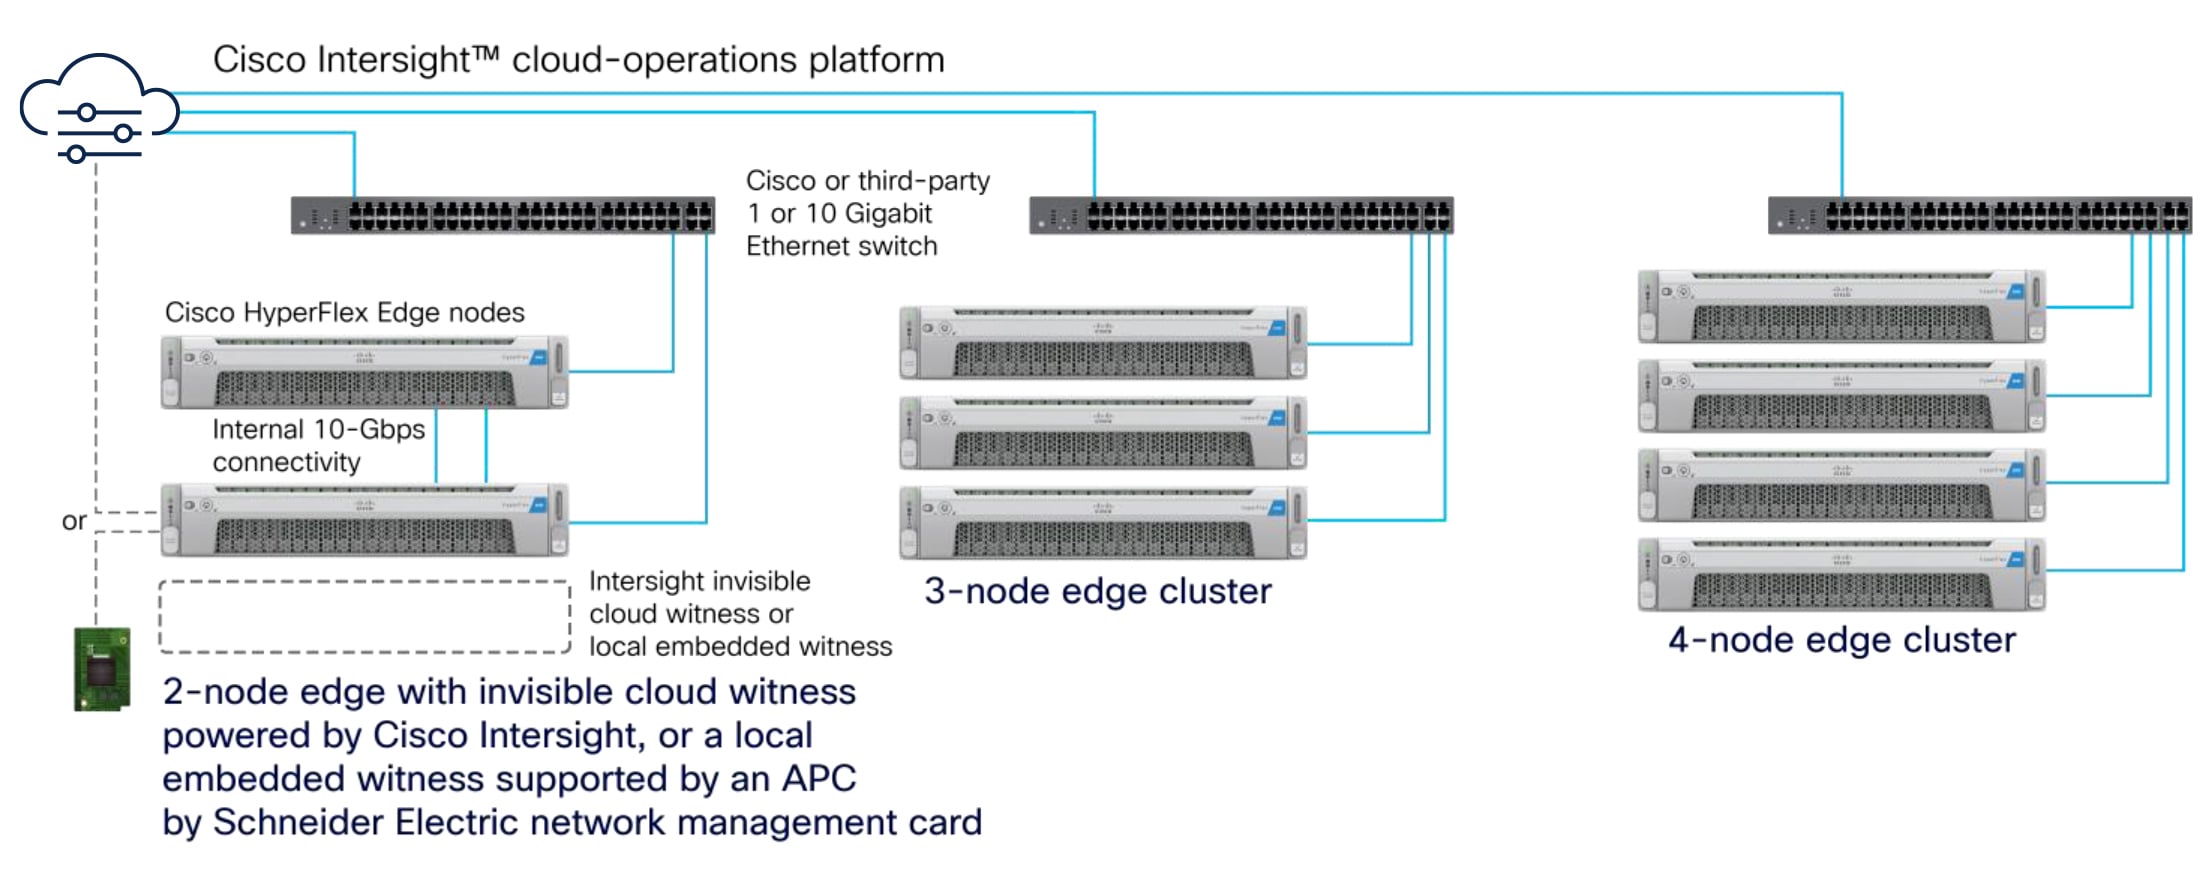 Cisco HyperFlex Edge delivers a preintegrated, high storage capacity cluster to remote-office and branch-office locations